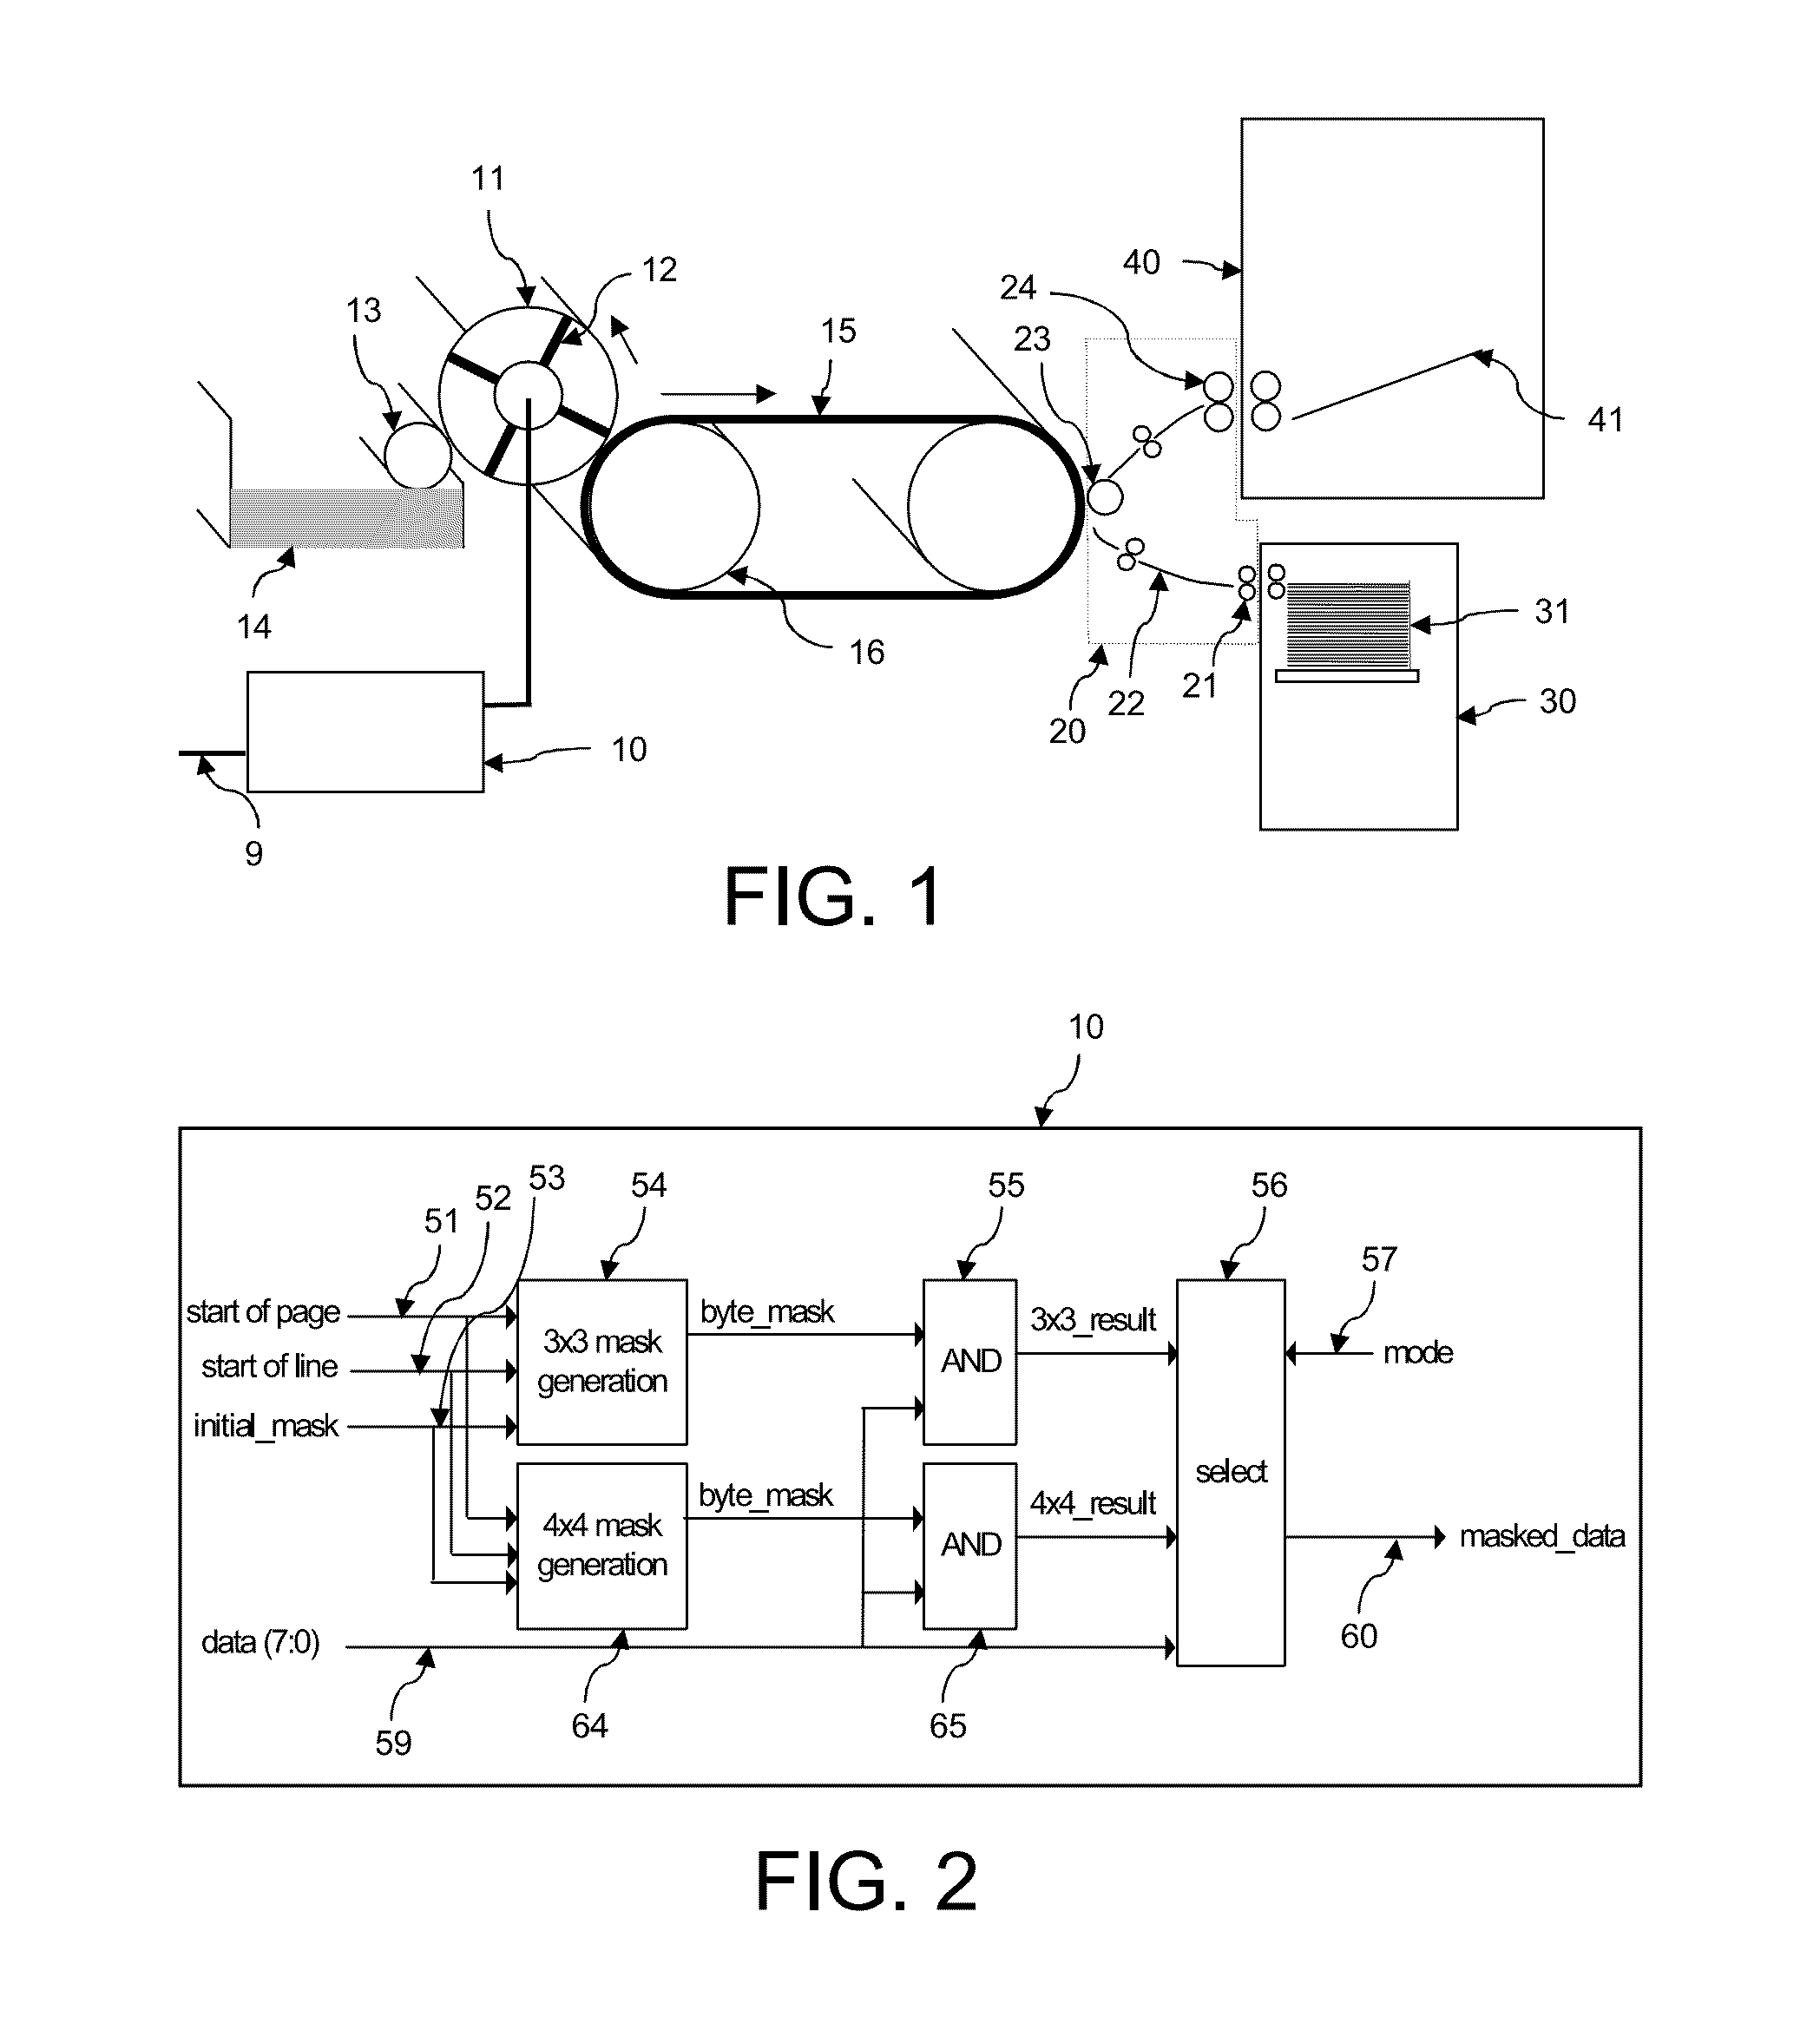 Method for adjusting the amount of marking material in a printed image